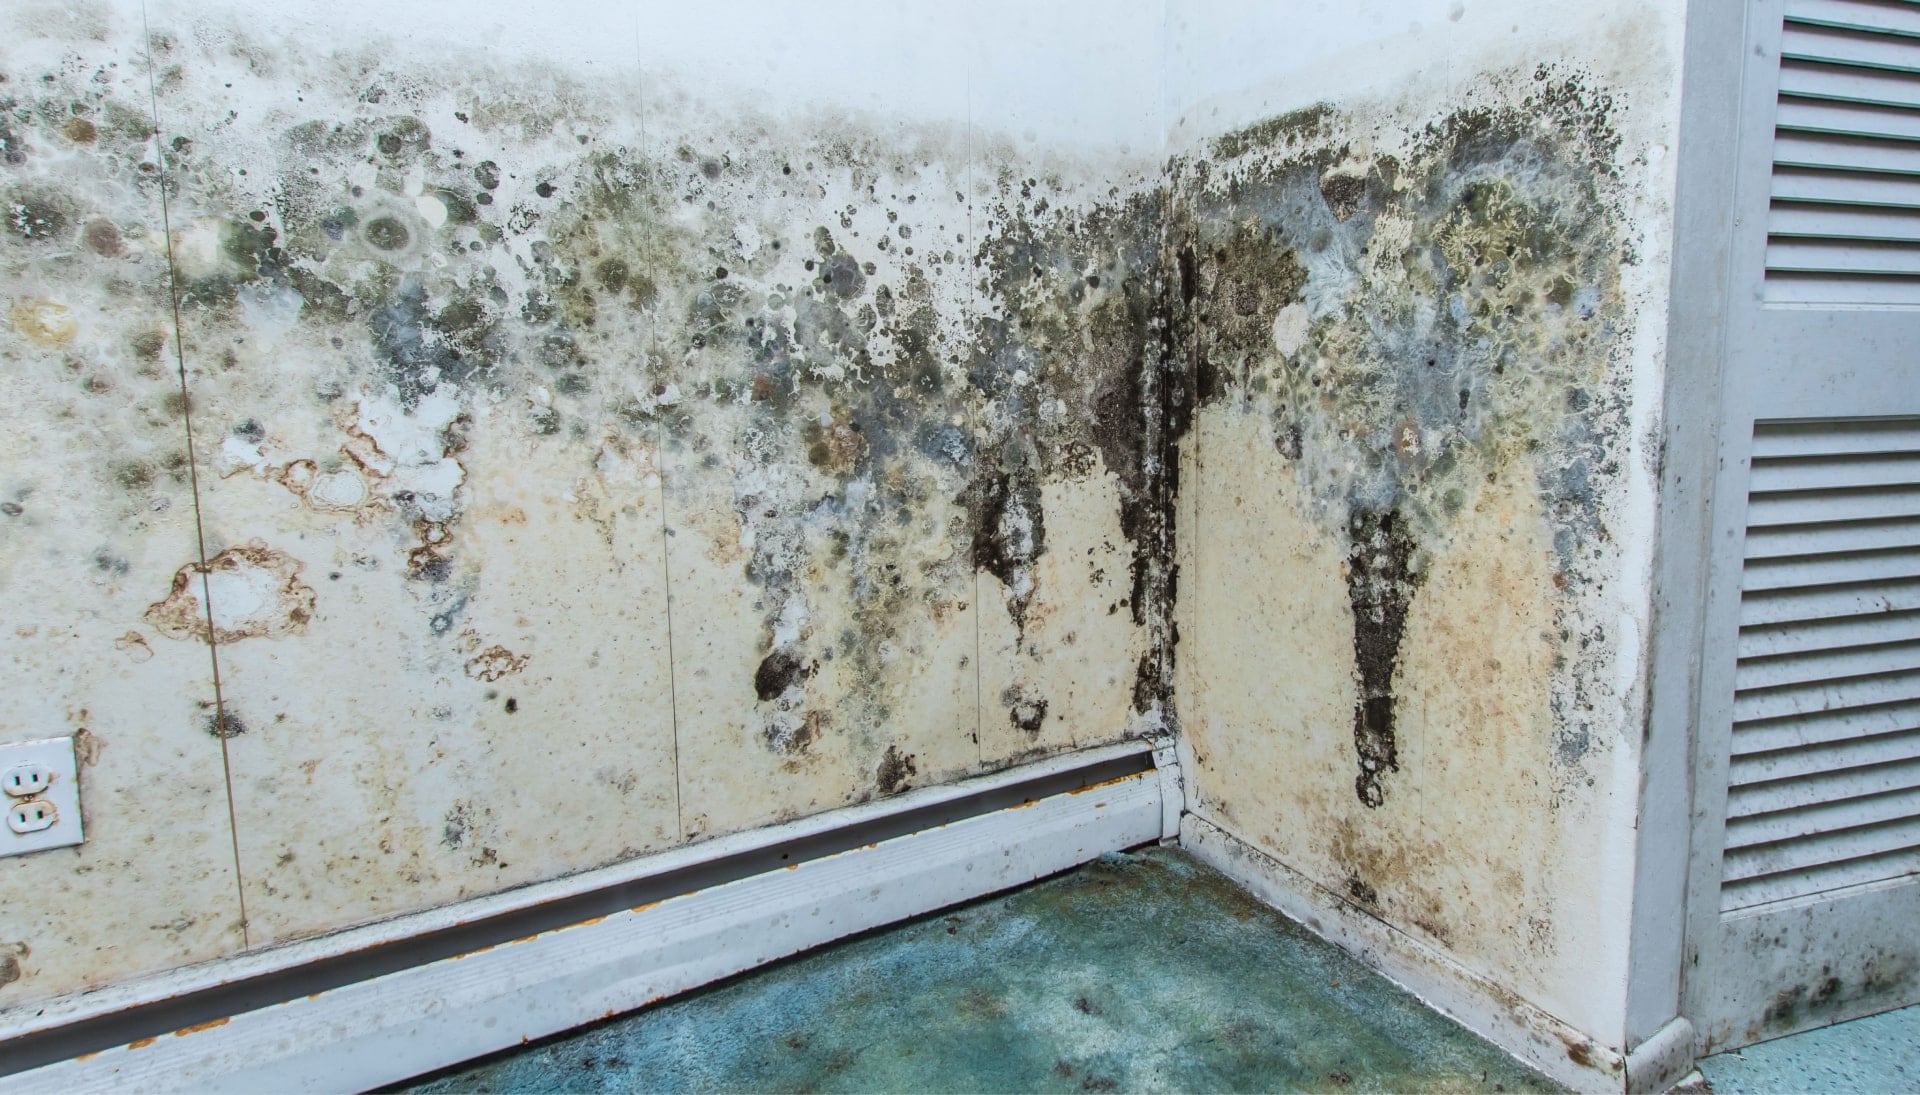 Mold-Damager-Odor-Control in Orange County